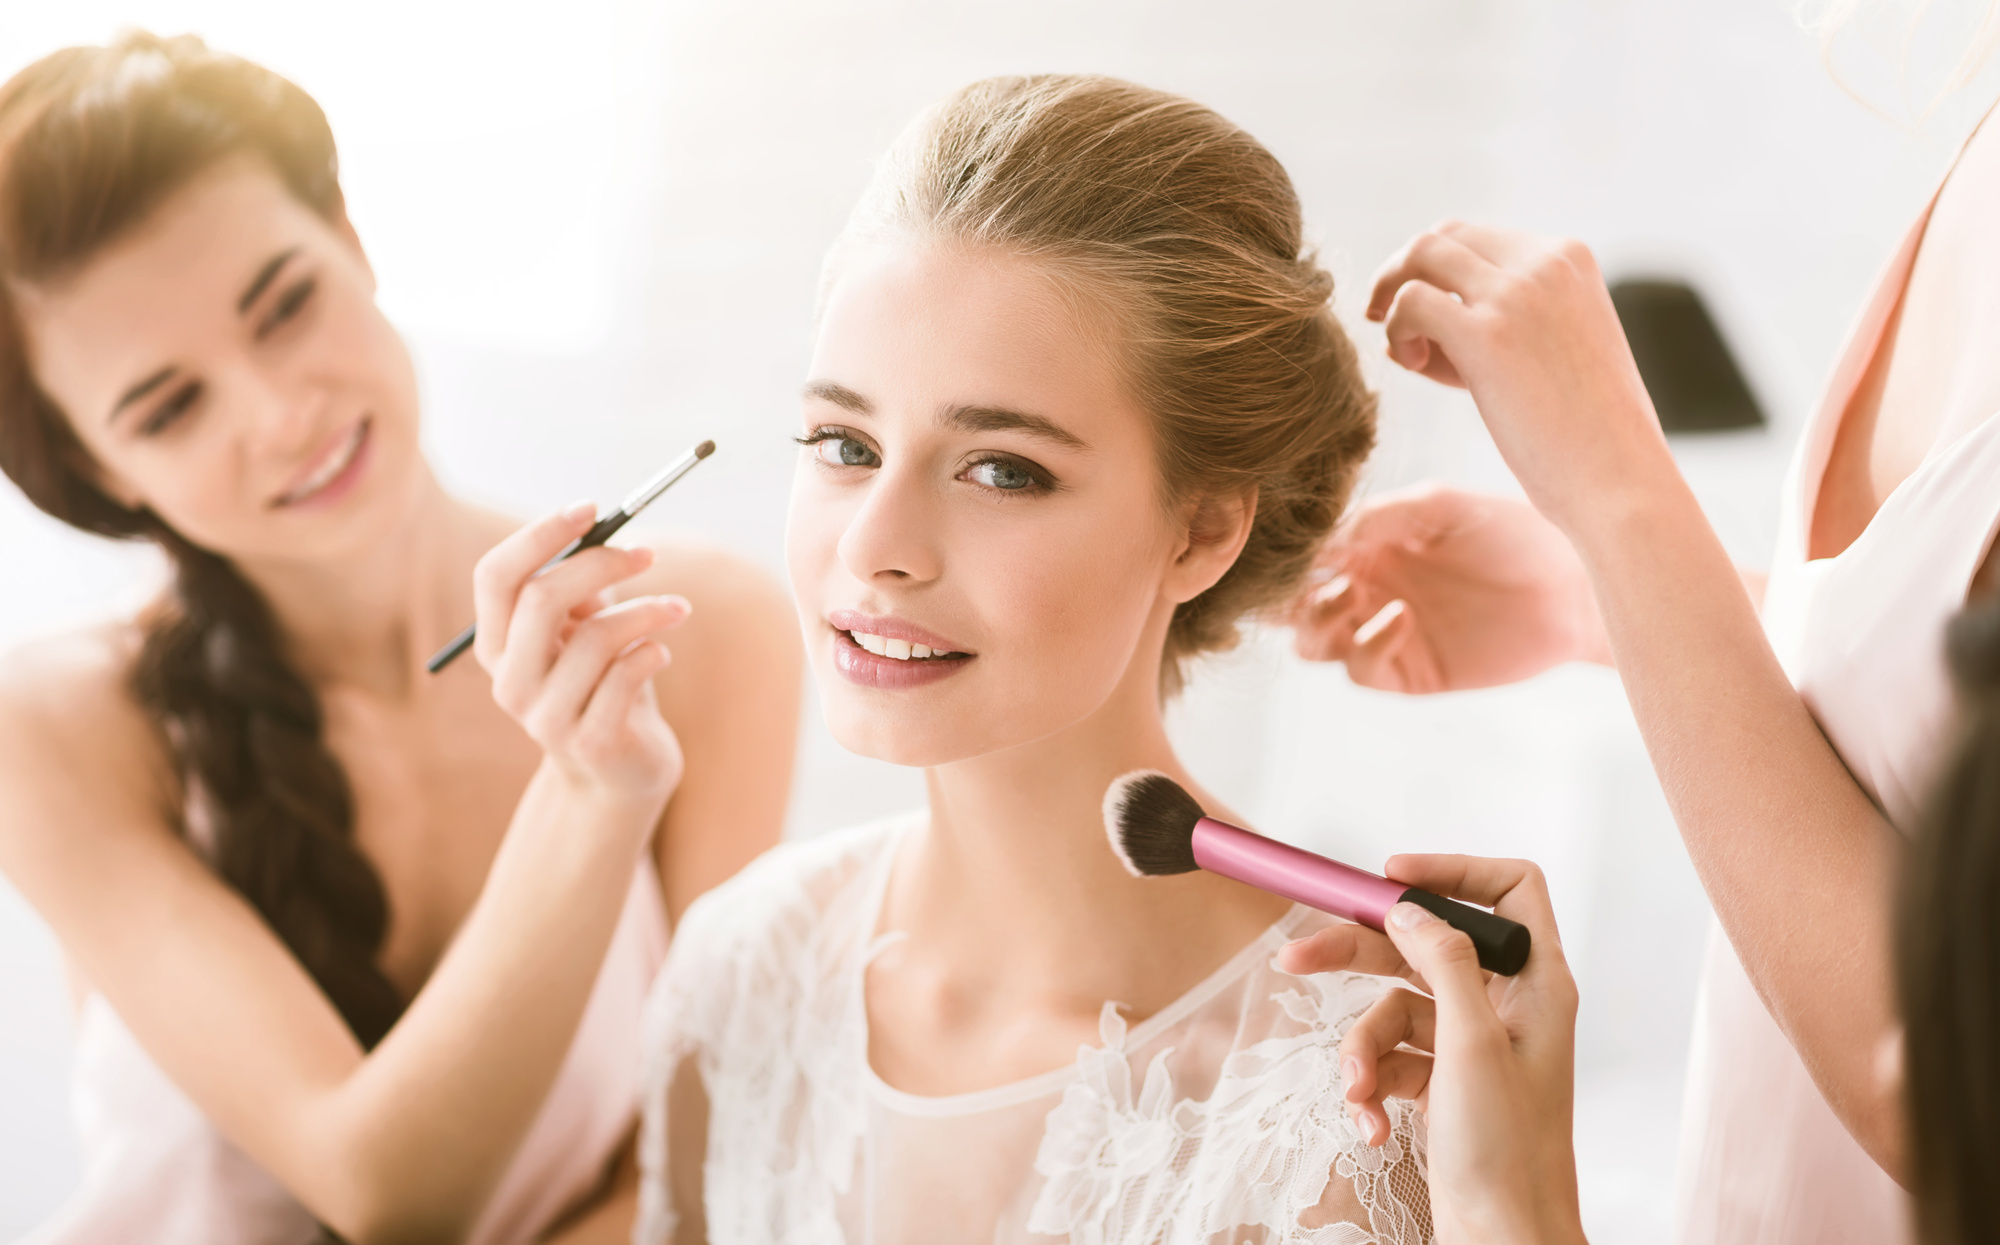 6 Common Makeup Mistakes and How to Avoid Them